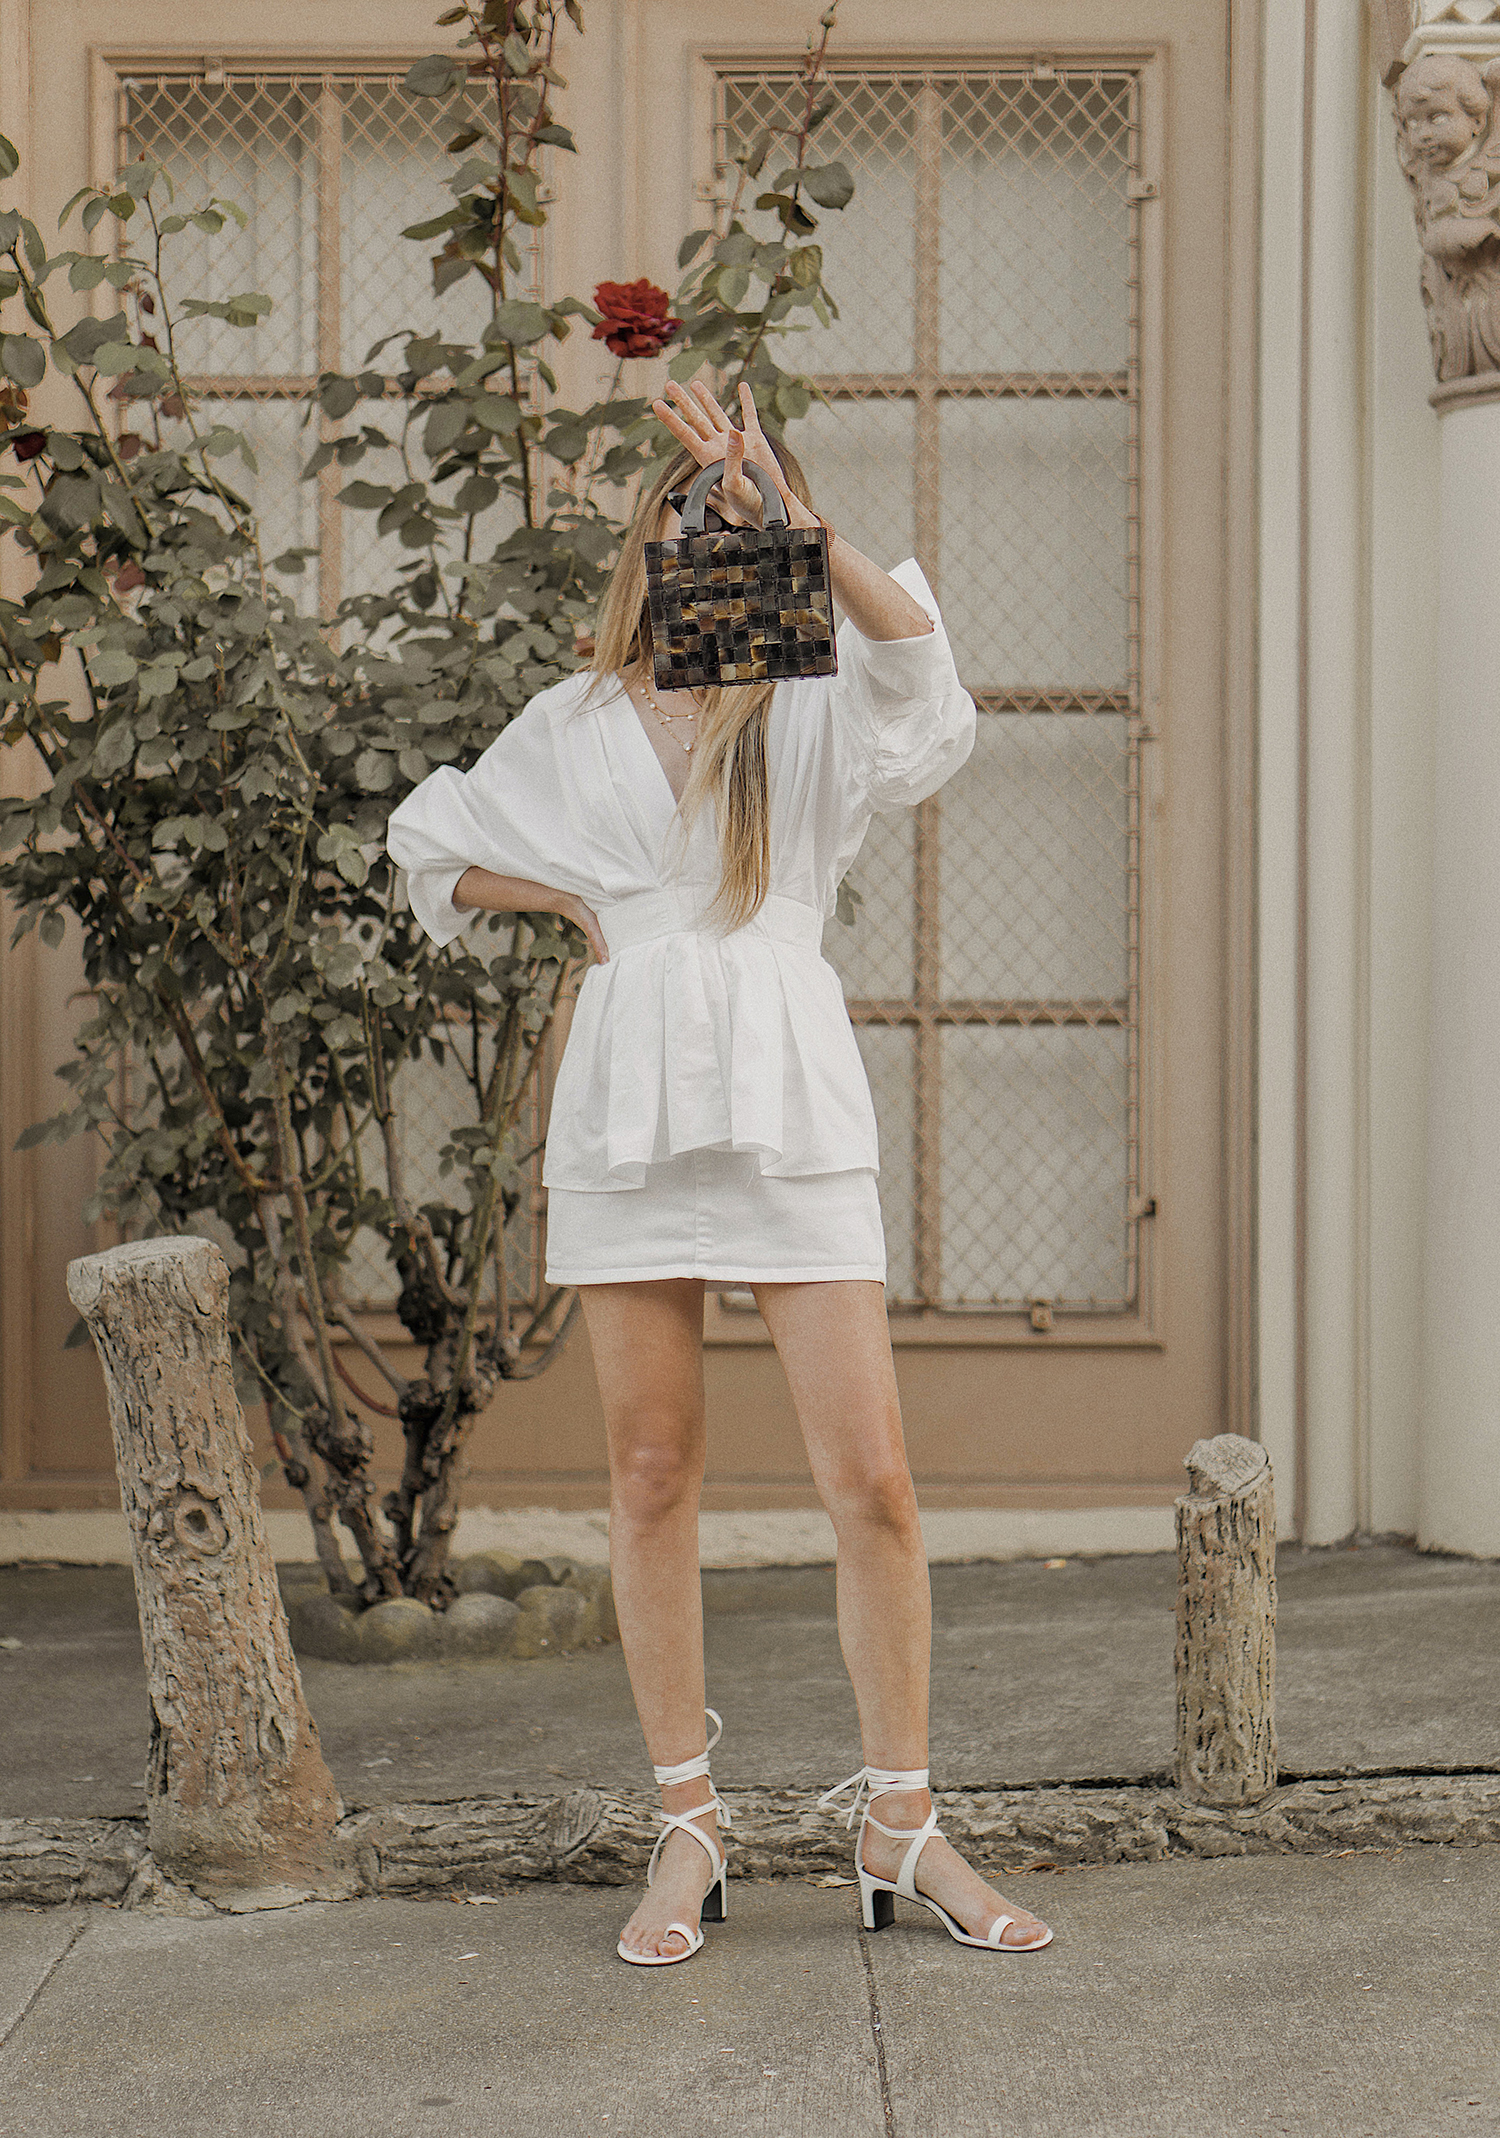 white_outfit_look_ideas_street_style_total_white_Céline_inspired_Ring_Toe_Lace_Up_Sandals_summer_san_francisco_fashion_blogger_bay_area_the_white_ocean_lena_juice_04